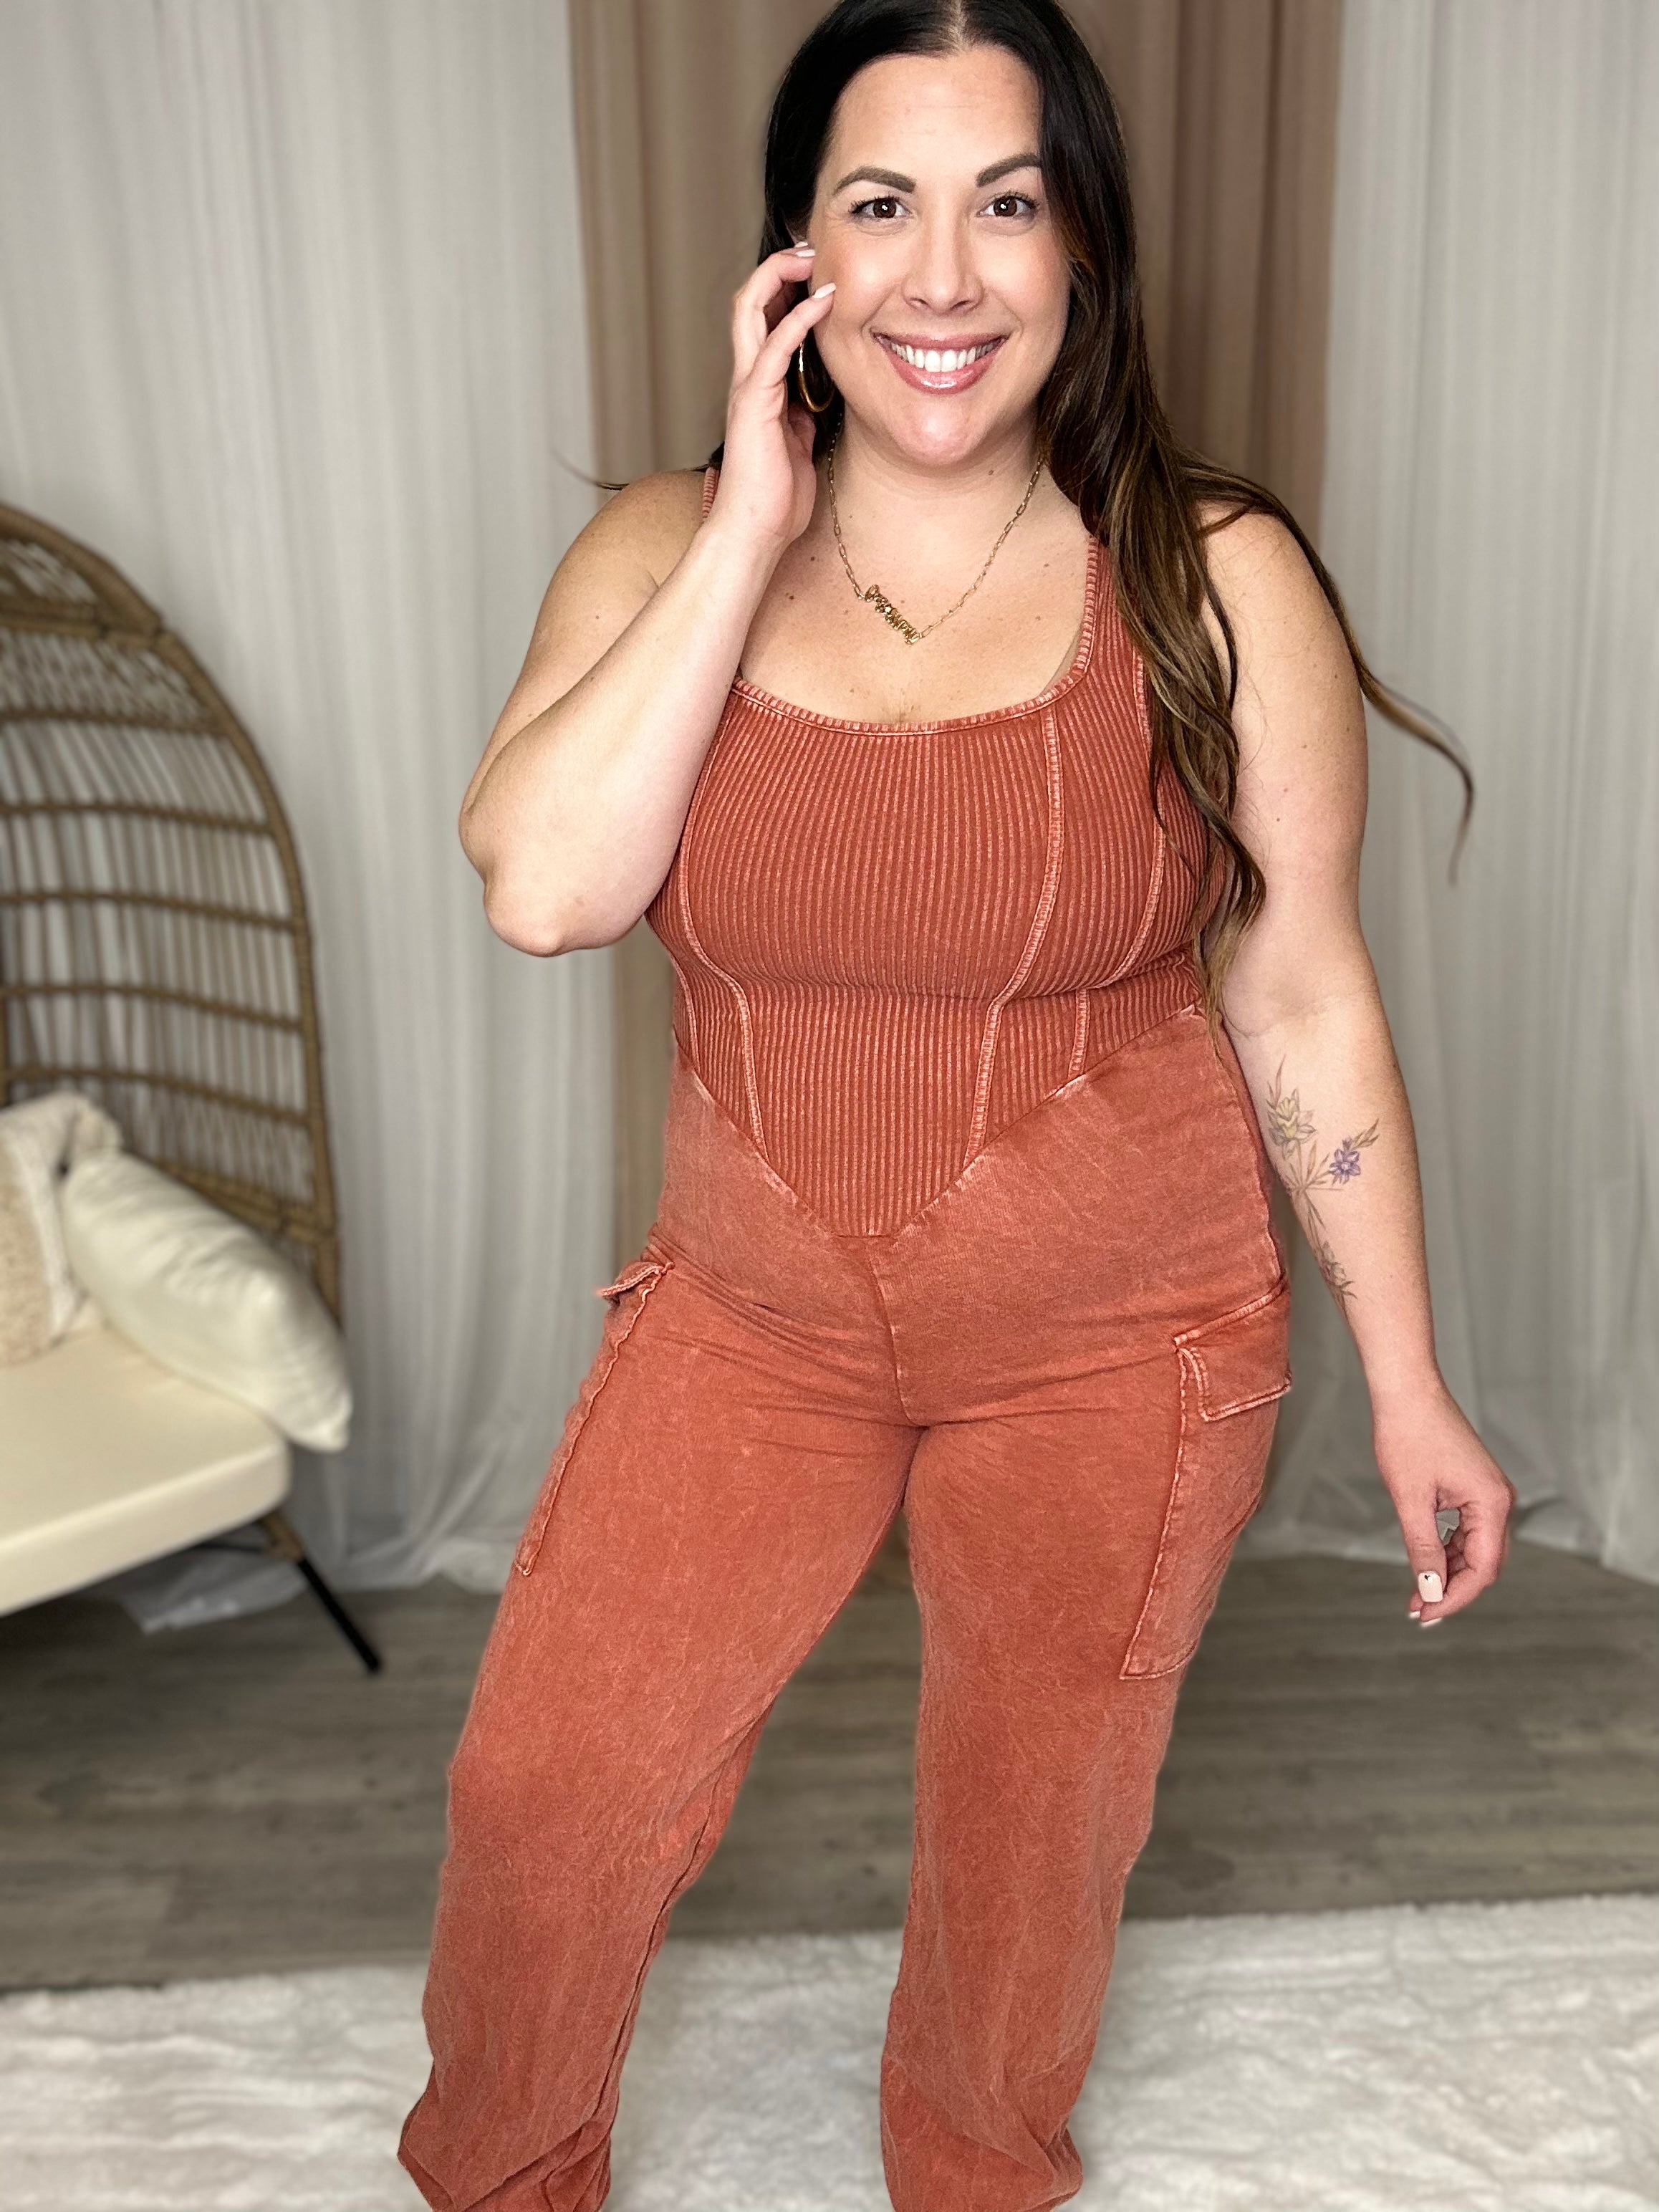 Super Waist Snatcher Mineral Wash Jumpsuit-230 Dresses/Jumpsuits/Rompers-J. Her-Heathered Boho Boutique, Women's Fashion and Accessories in Palmetto, FL